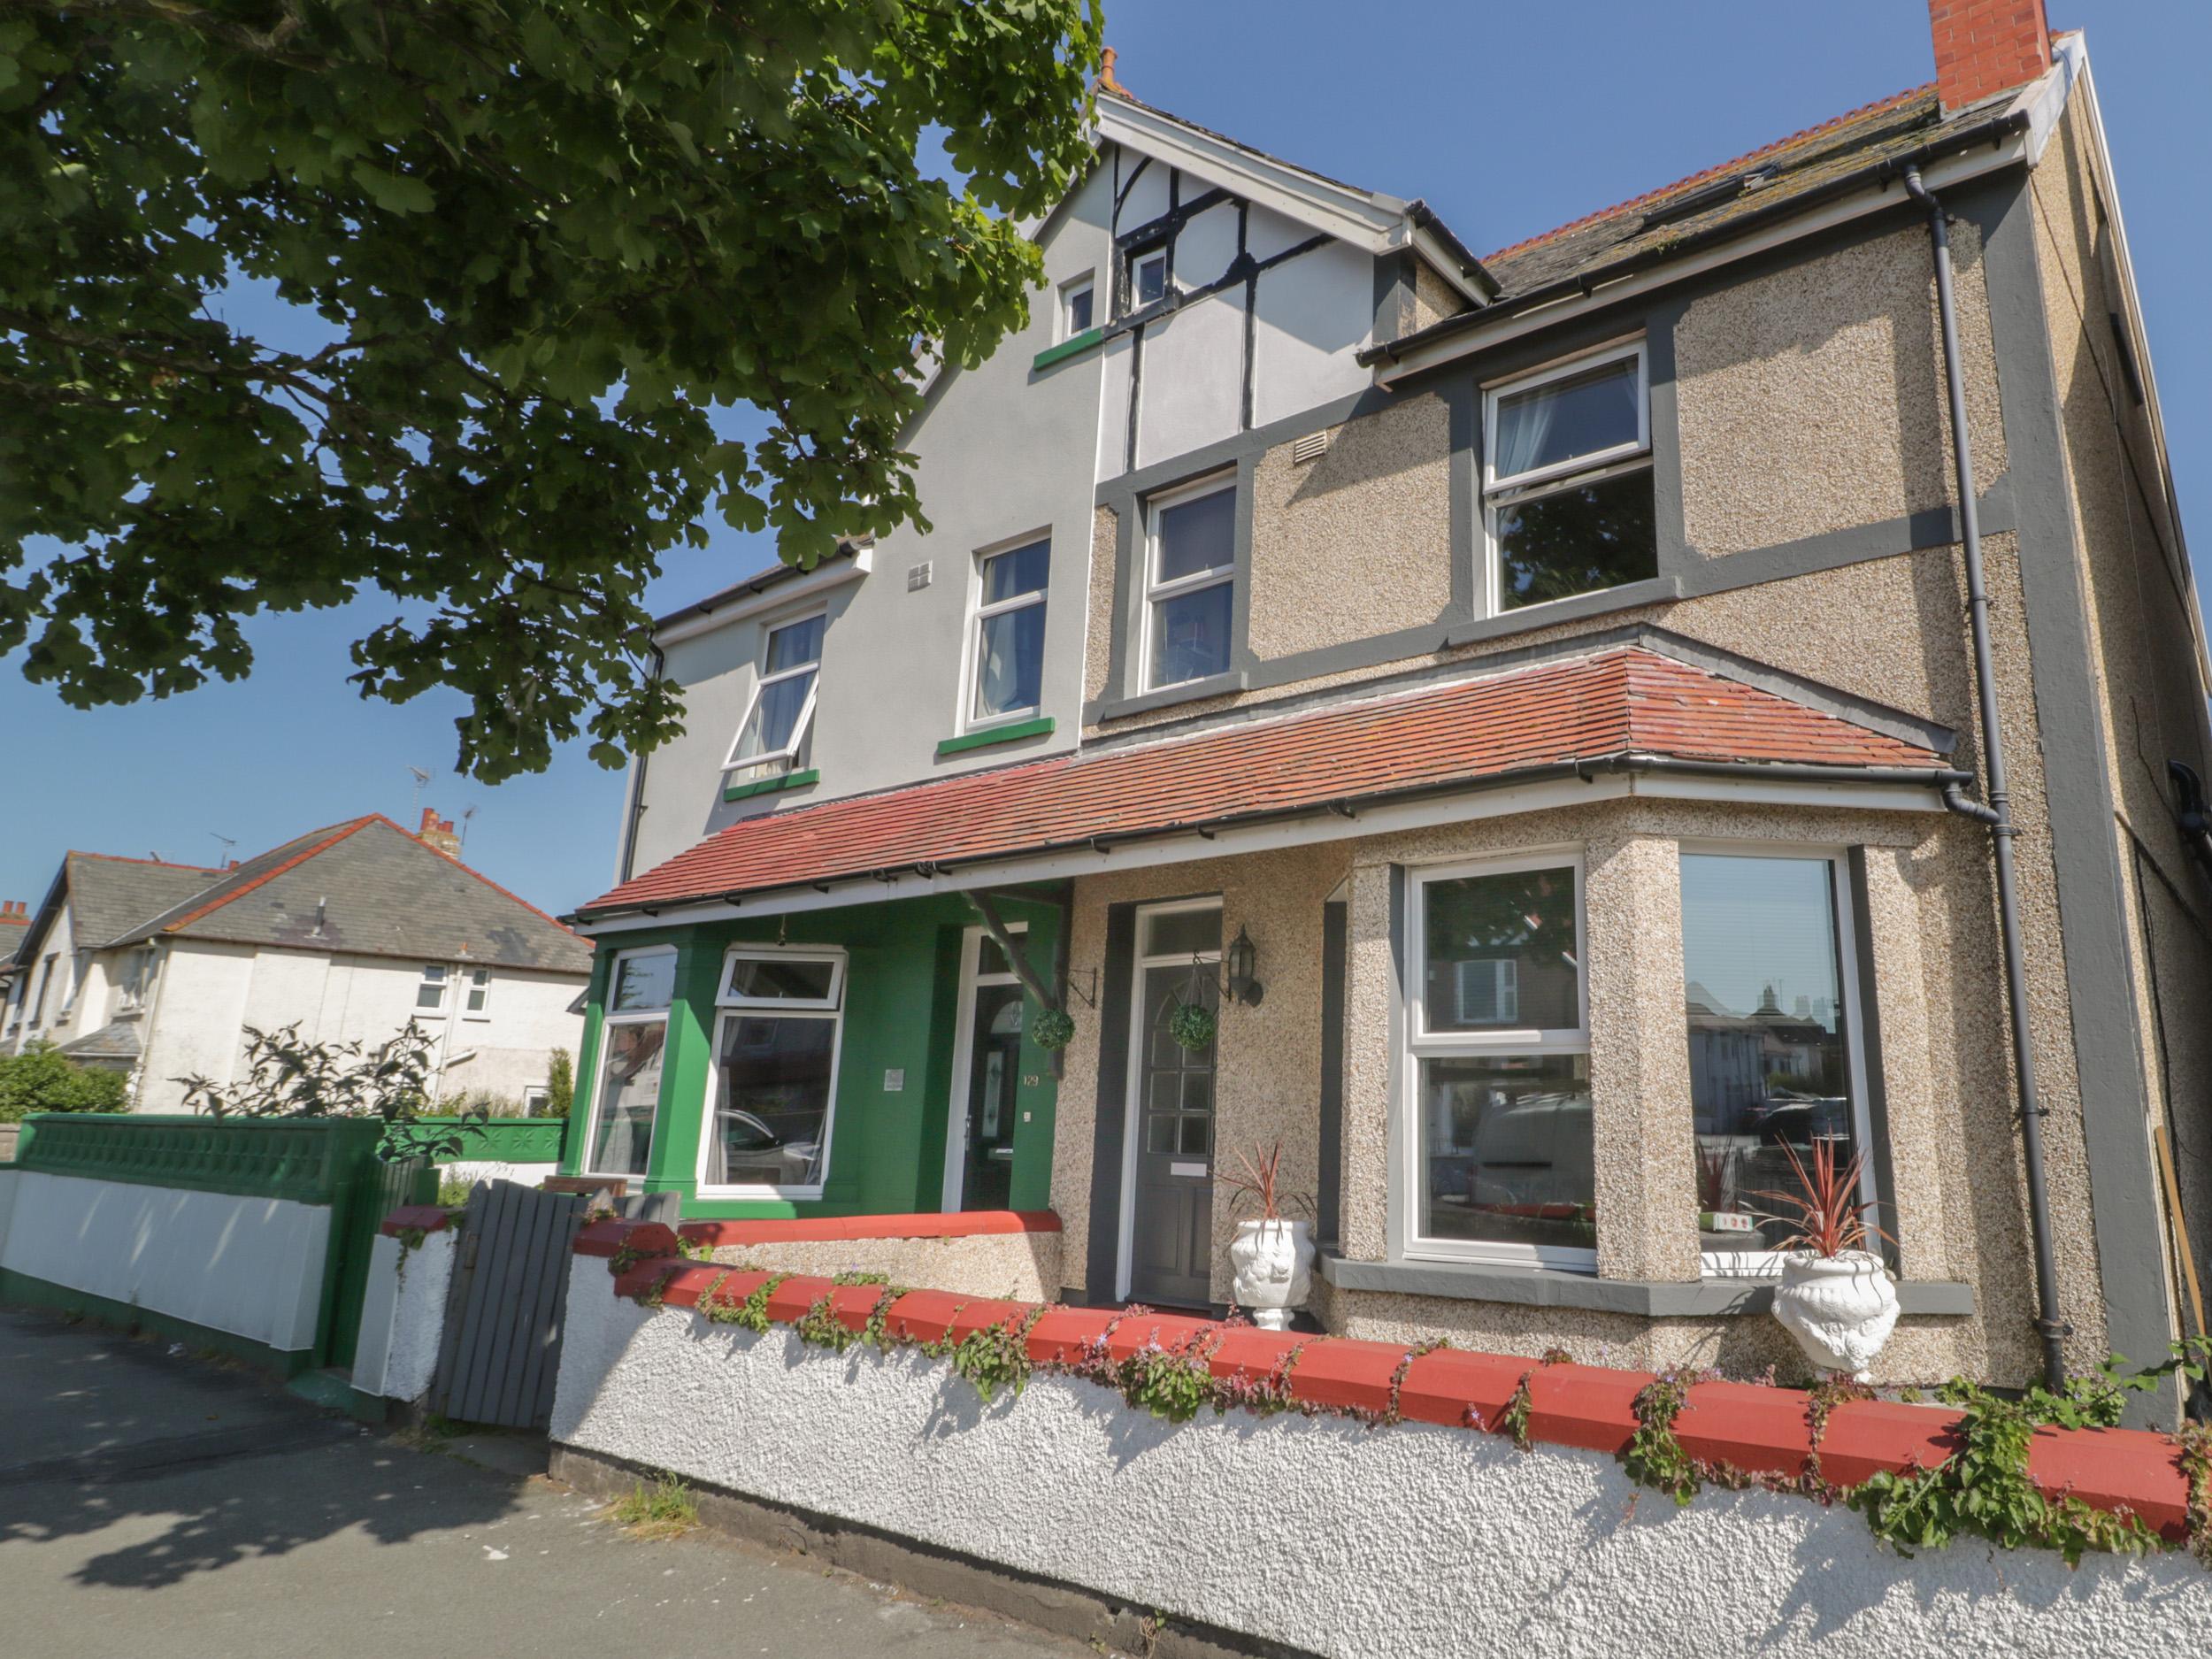 Holiday Cottage Reviews for 131 Trinity Avenue - Cottage Holiday in Llandudno, Conwy